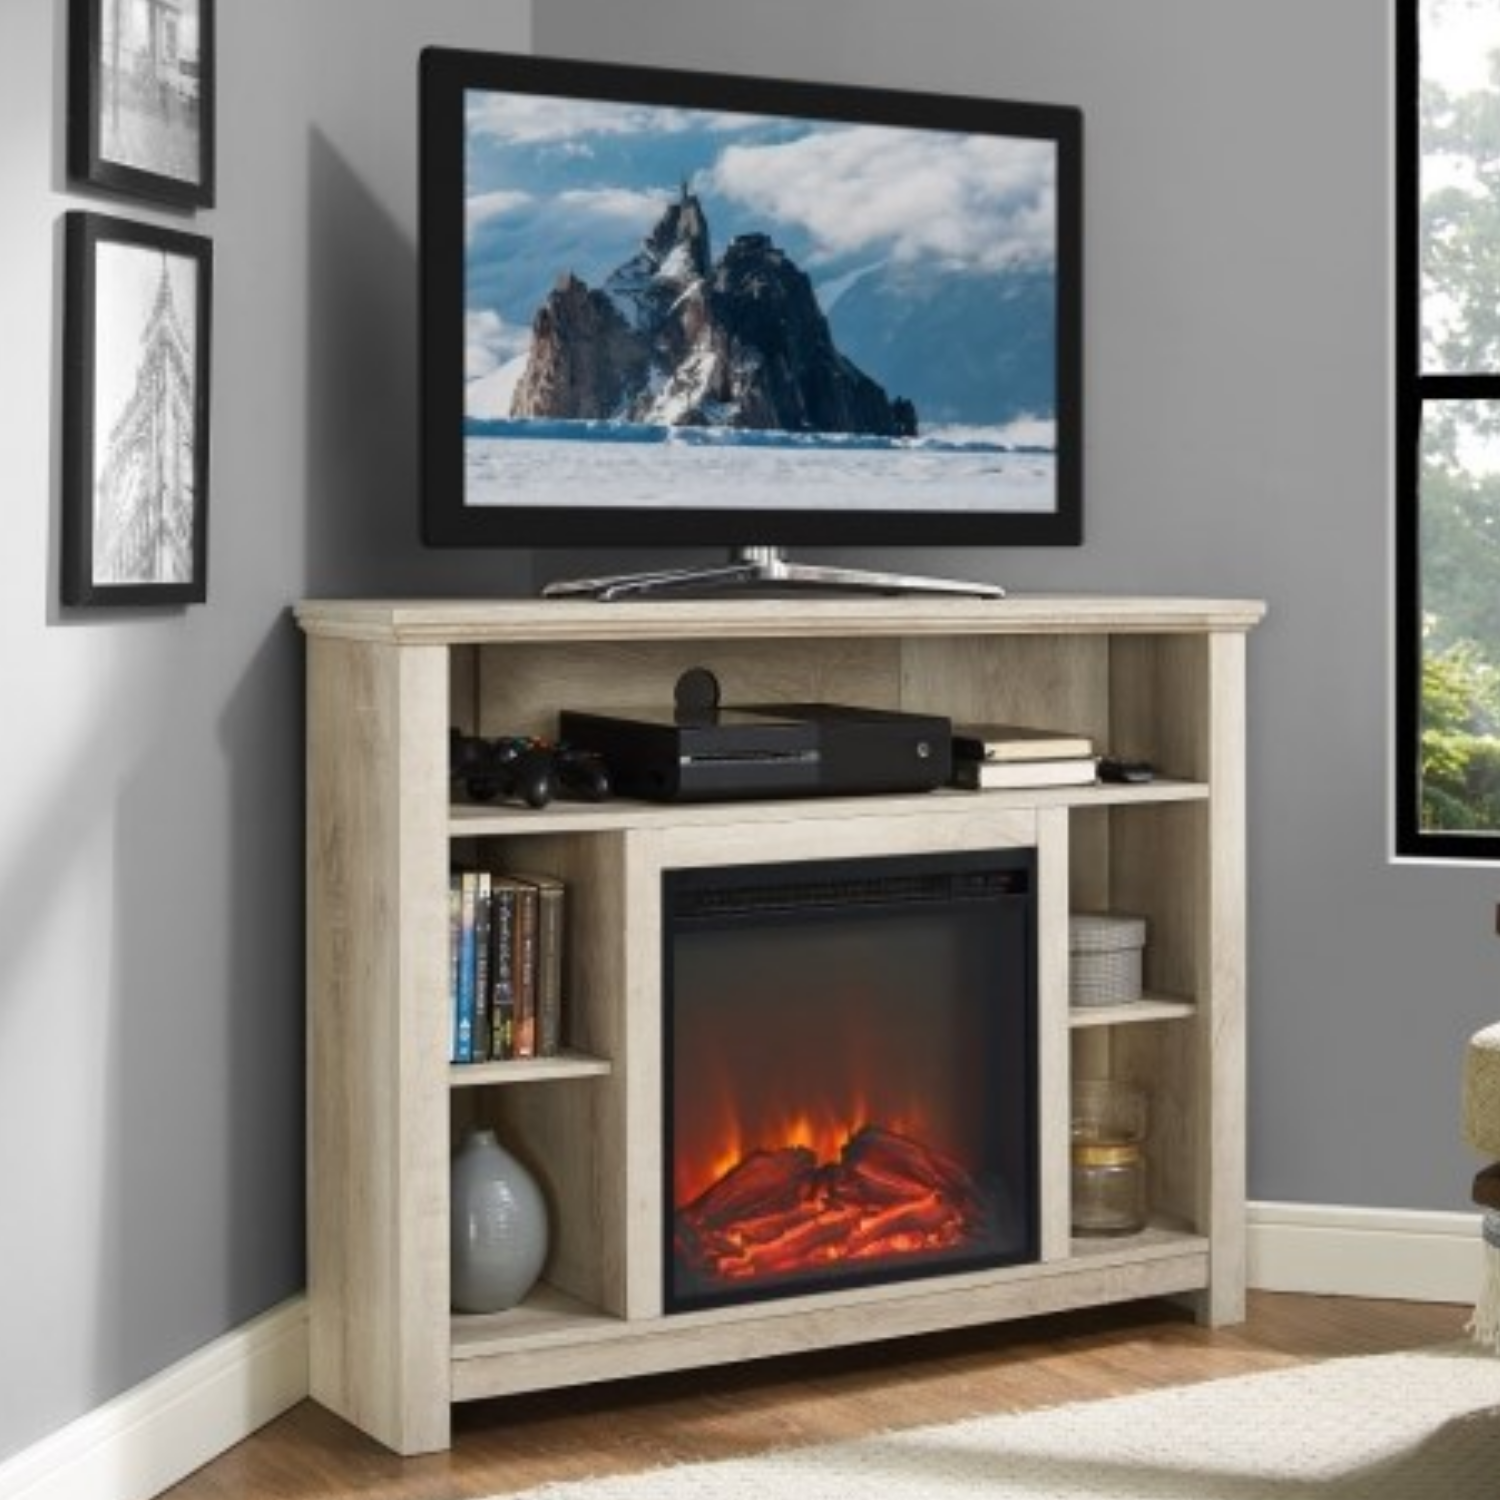 Corner Tv Unit With Electric Fire, Corner Tv Stand With Fireplace 65 Cm